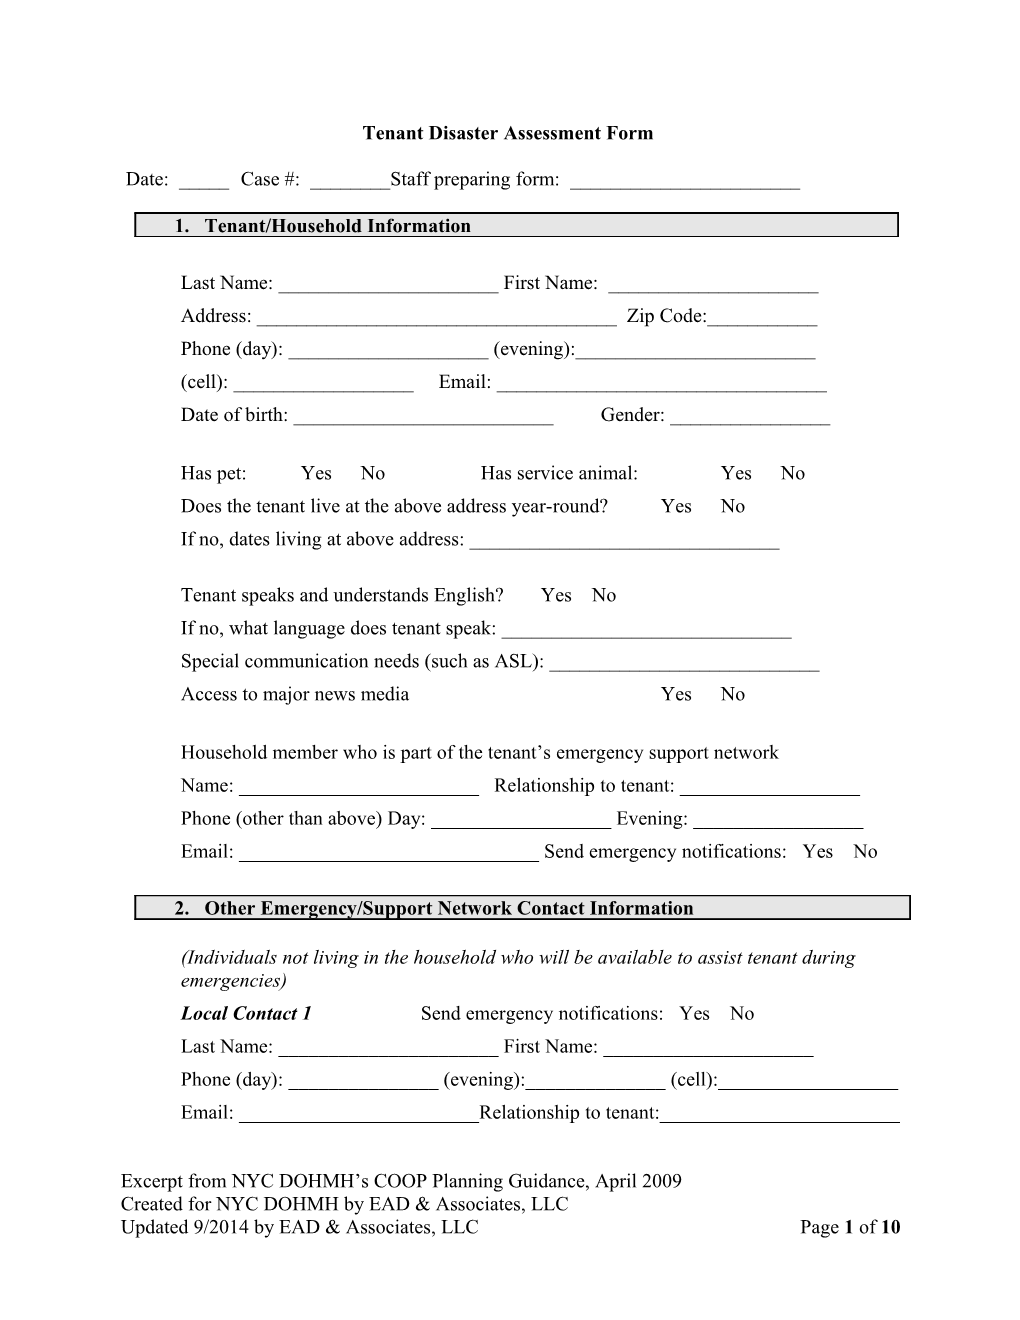 Planning Resource 14: Client Disaster Assessment Form